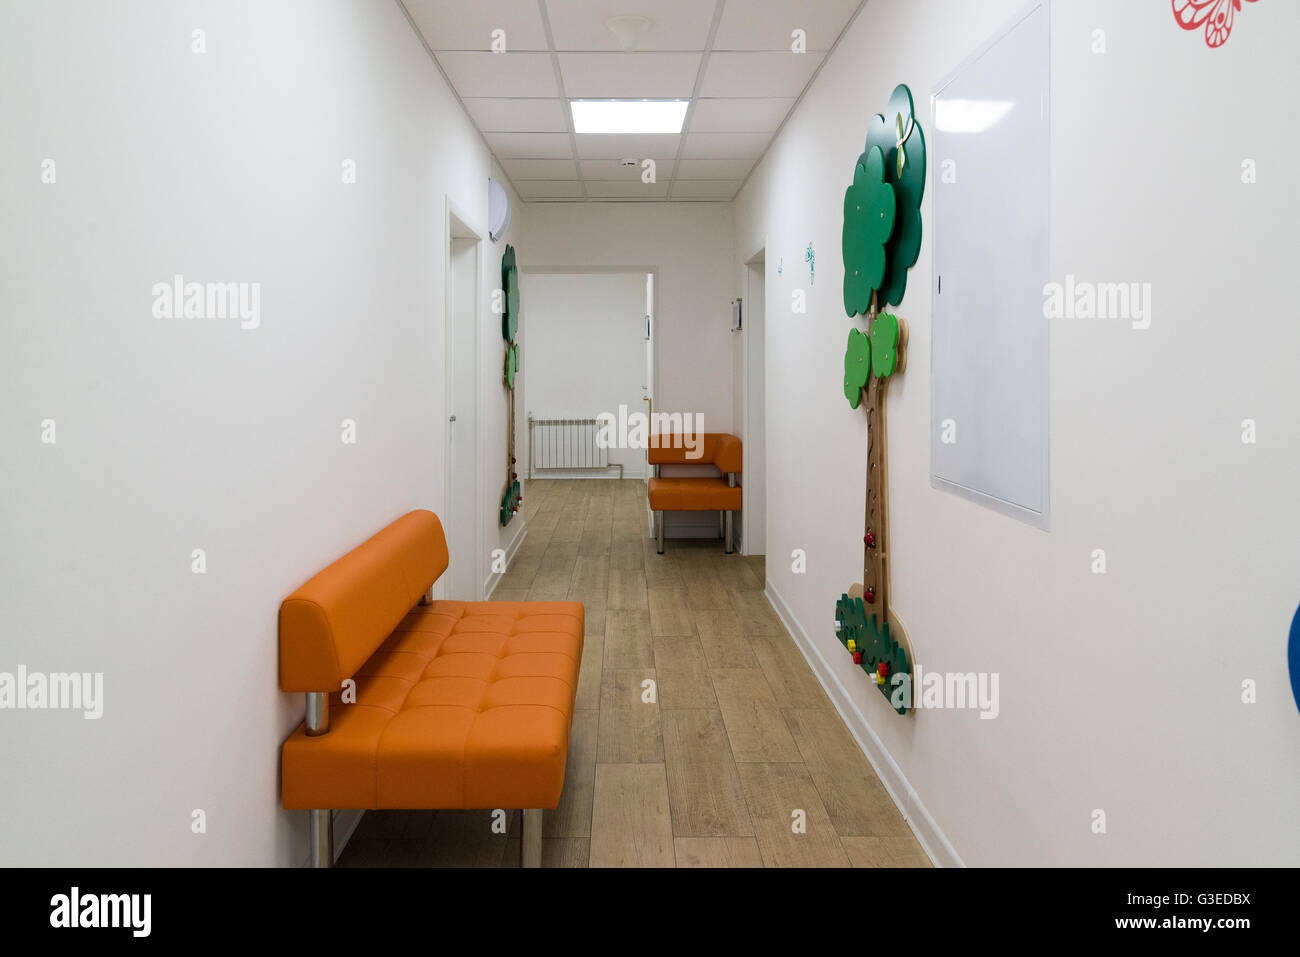 Children's Medical Center with educational games on walls Stock Photo